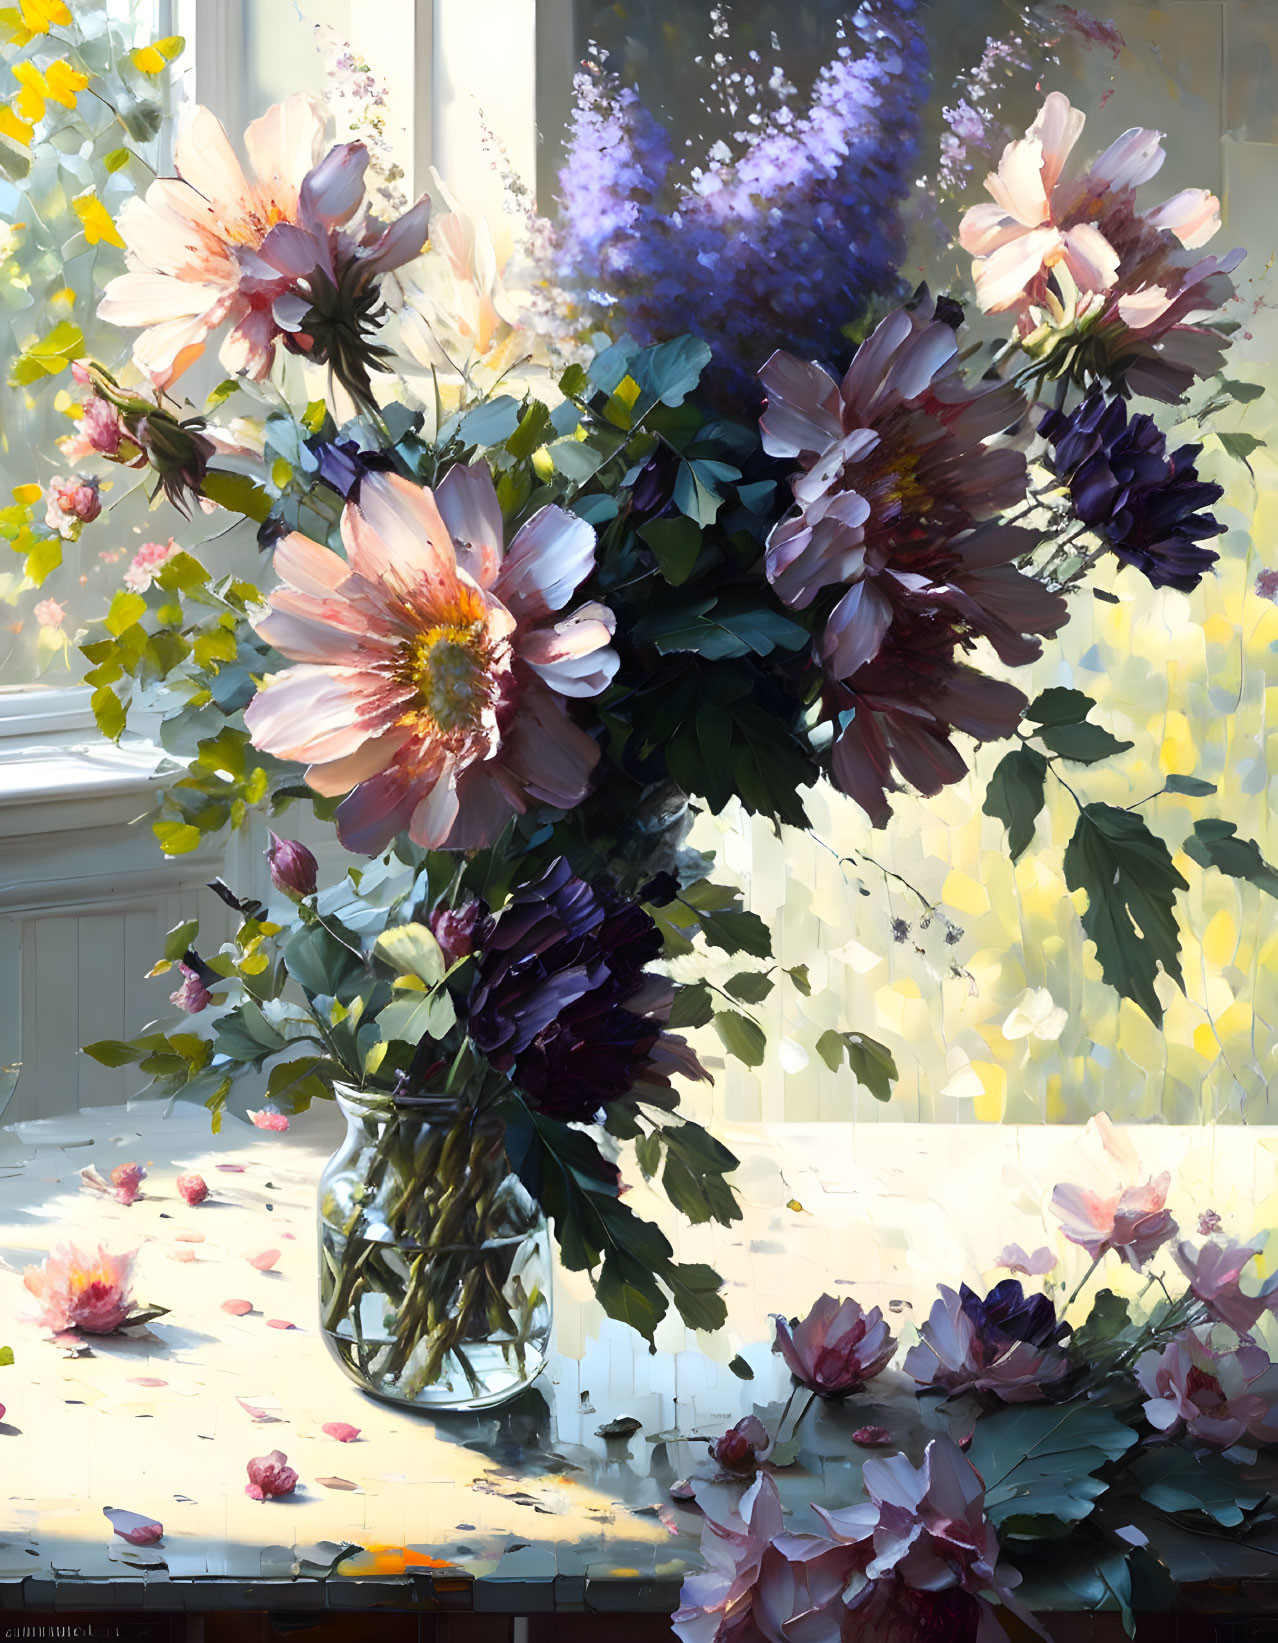 Flowers on the Table